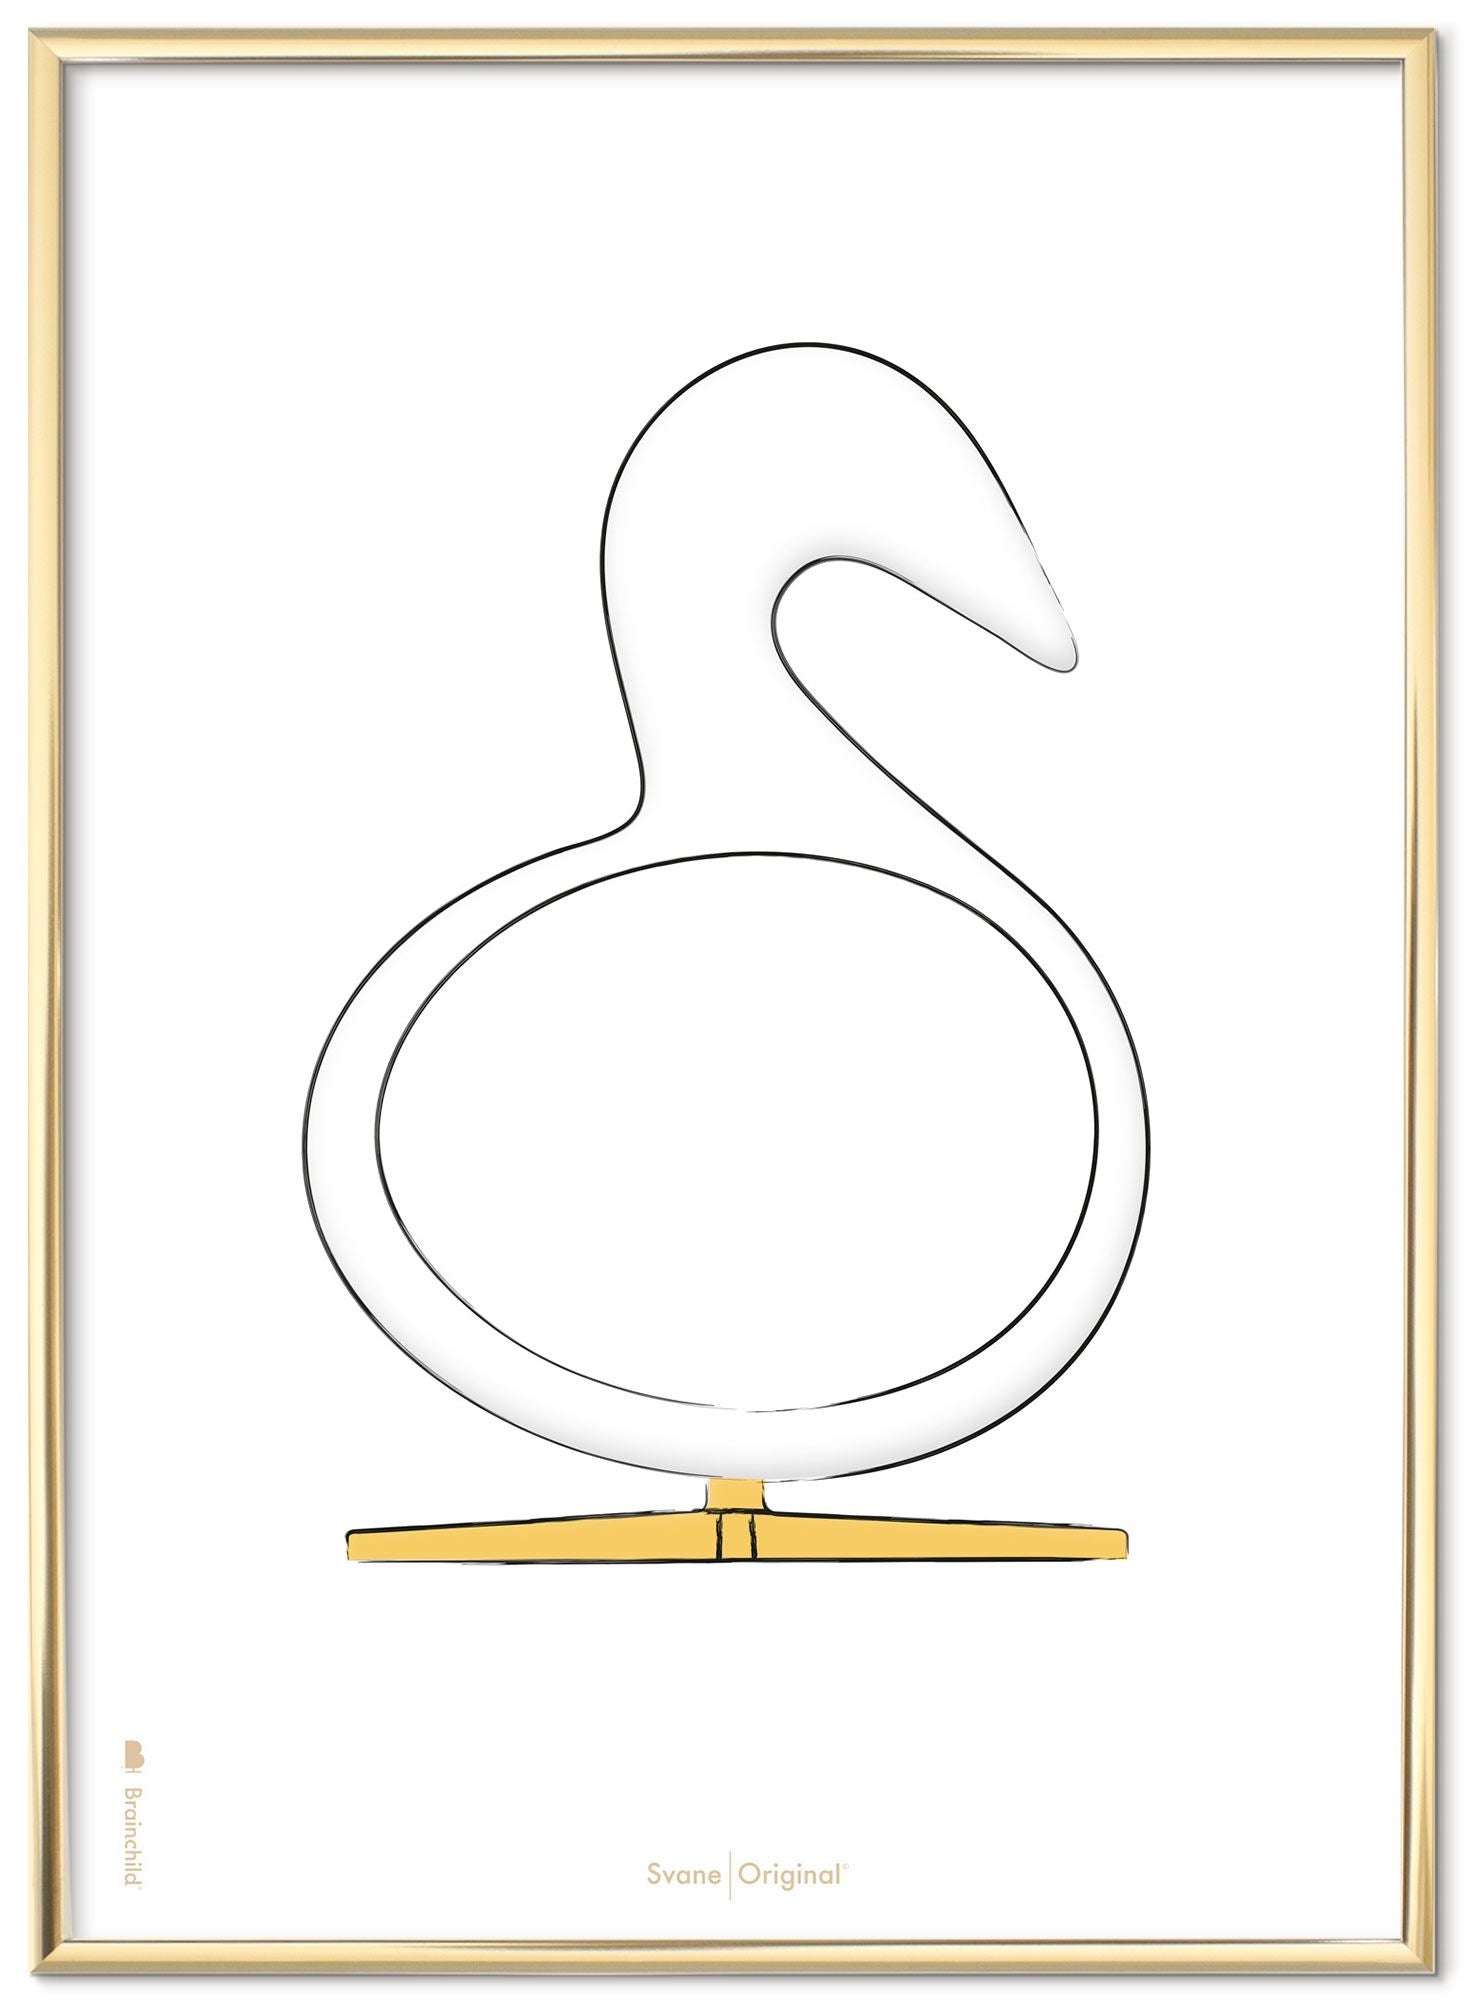 Brainchild Swan Design Sketch Poster Frame Made Of Brass Colored Metal A5, White Background